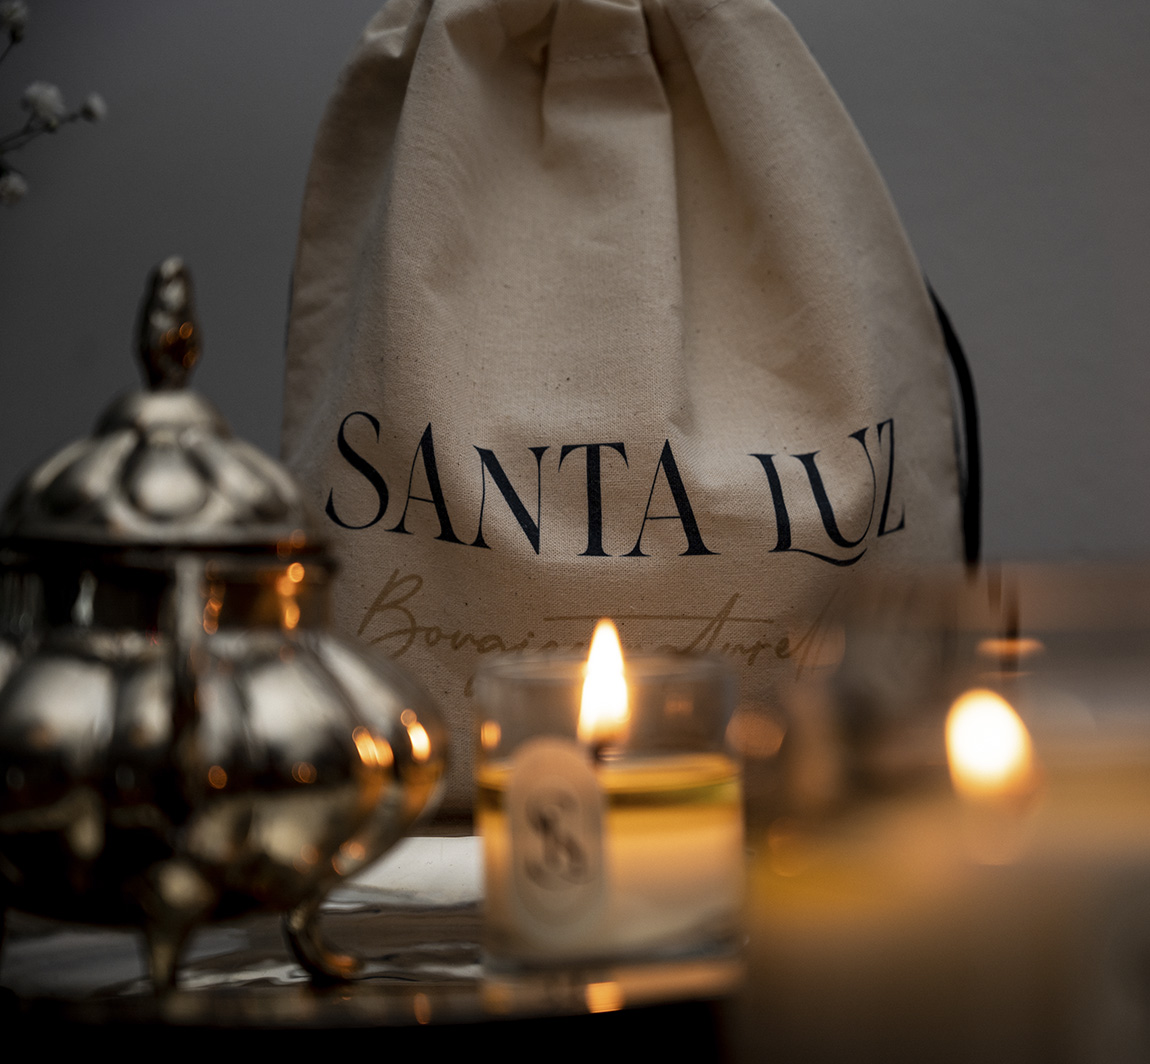 Santa Luz Bougies: Artisanally crafted and sustainably produced candles